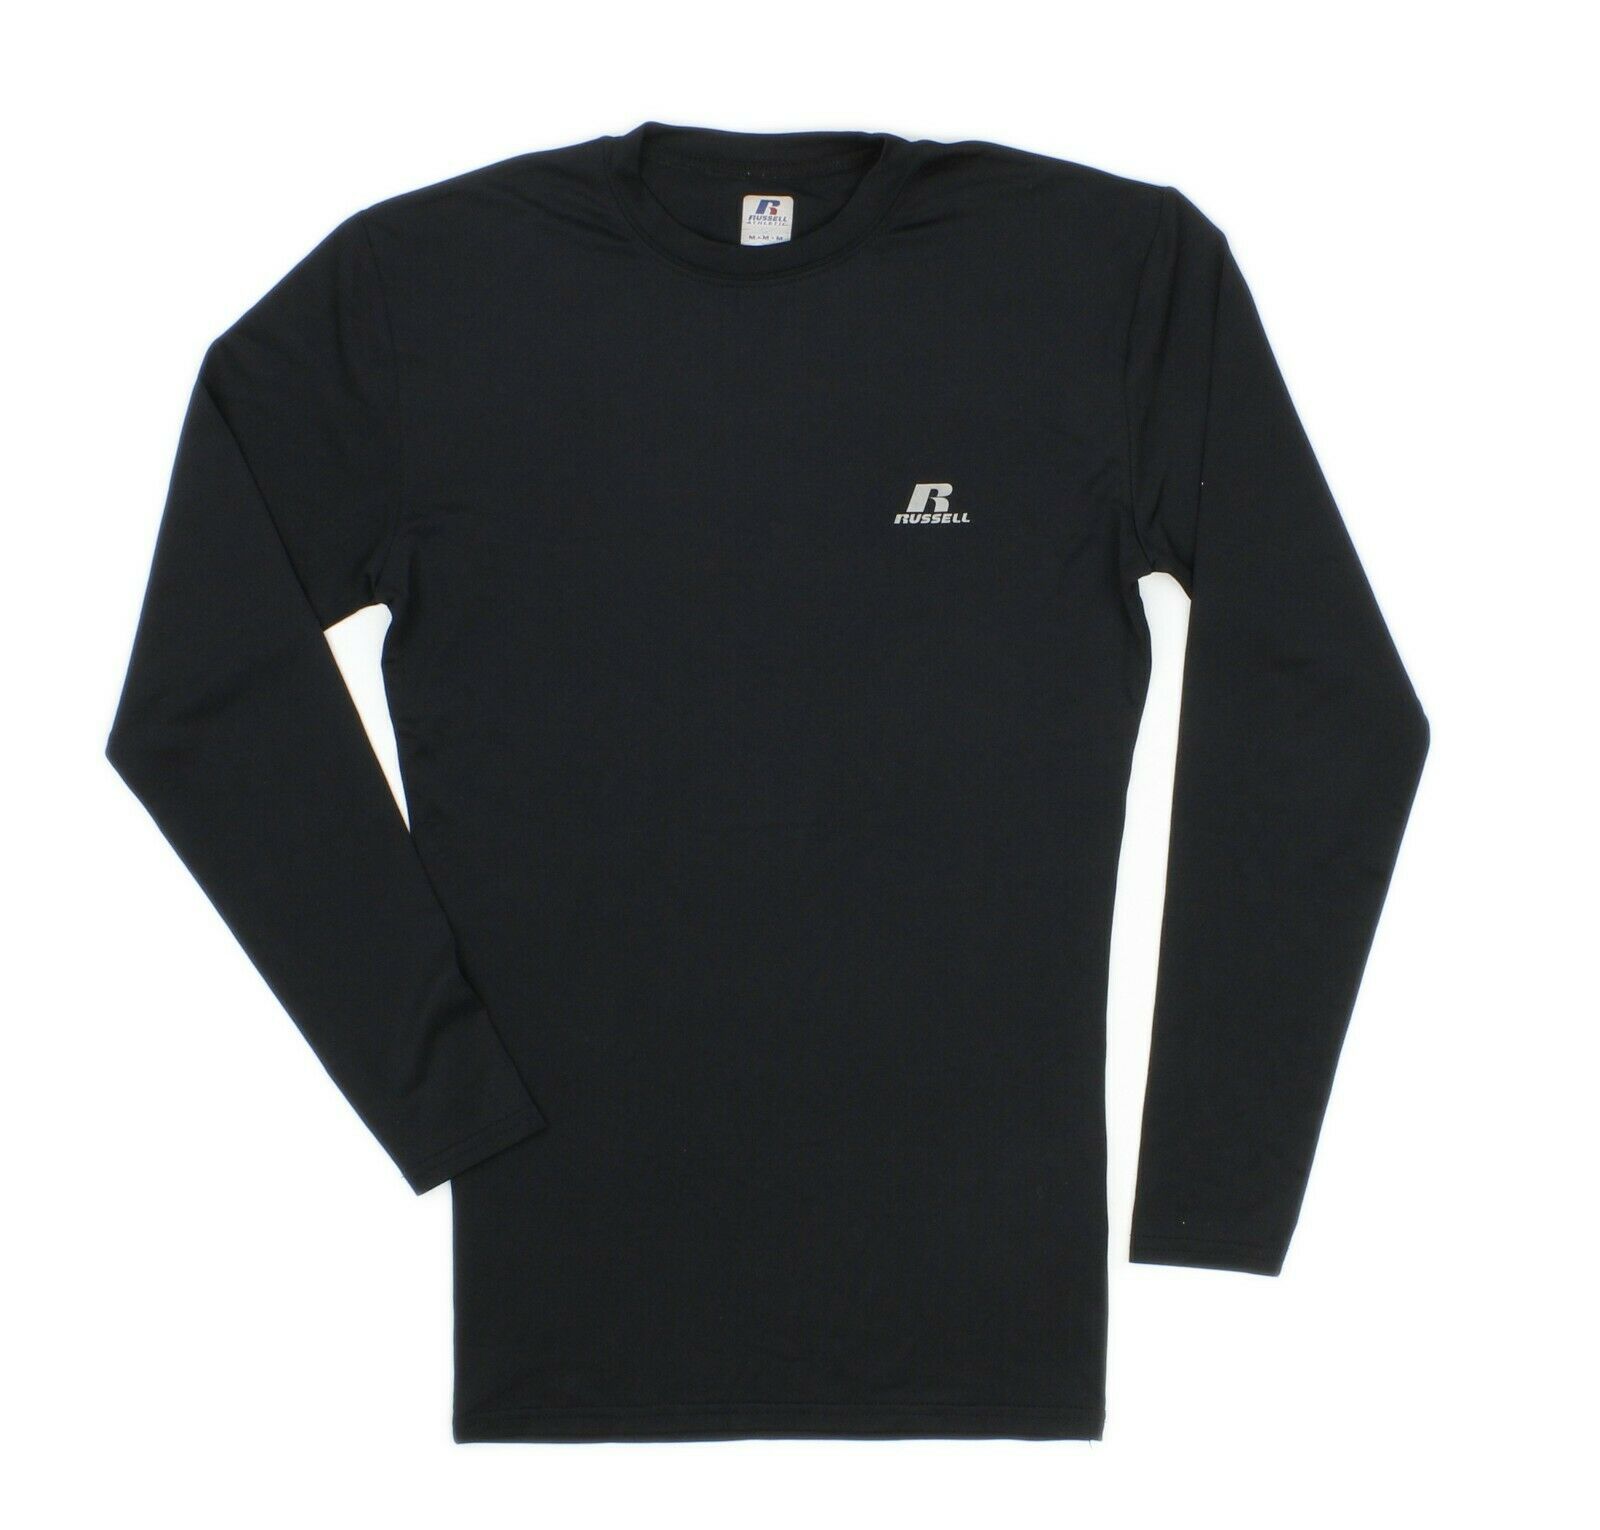 Russell Athletic Dri-power Black Long Sleeve Compression Workout Top Youth M